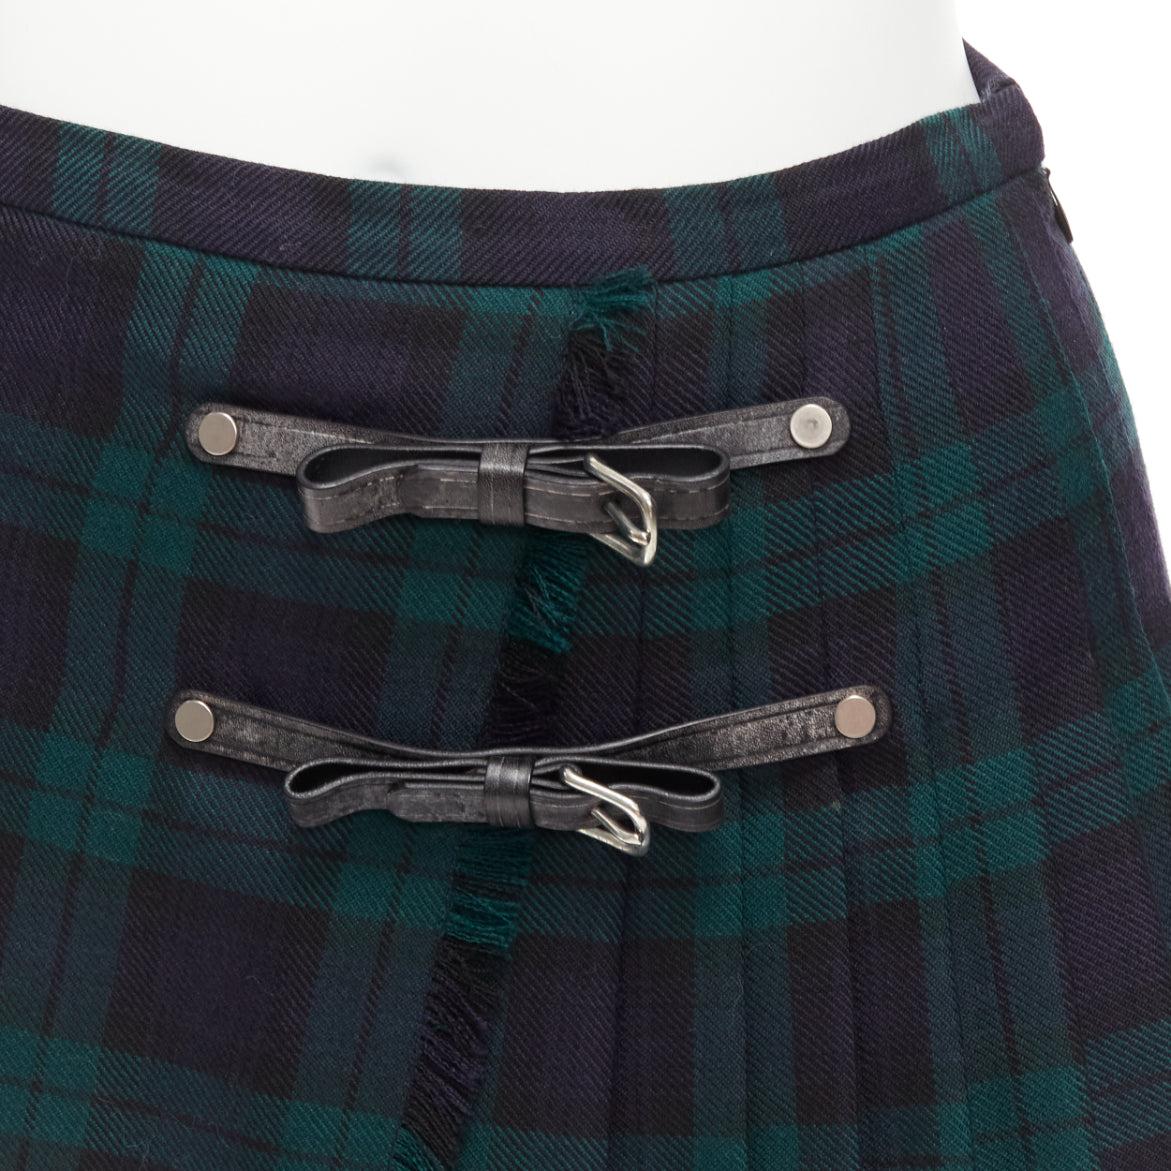 DSQUARED2 green Scotland plaid black leather bow buckle mini skirt XS
Reference: ANWU/A01175
Brand: Dsquared2
Material: Feels like wool
Color: Green, Black
Pattern: Checkered
Closure: Zip
Lining: Yellow Fabric
Extra Details: Side zip. Yellow fabric